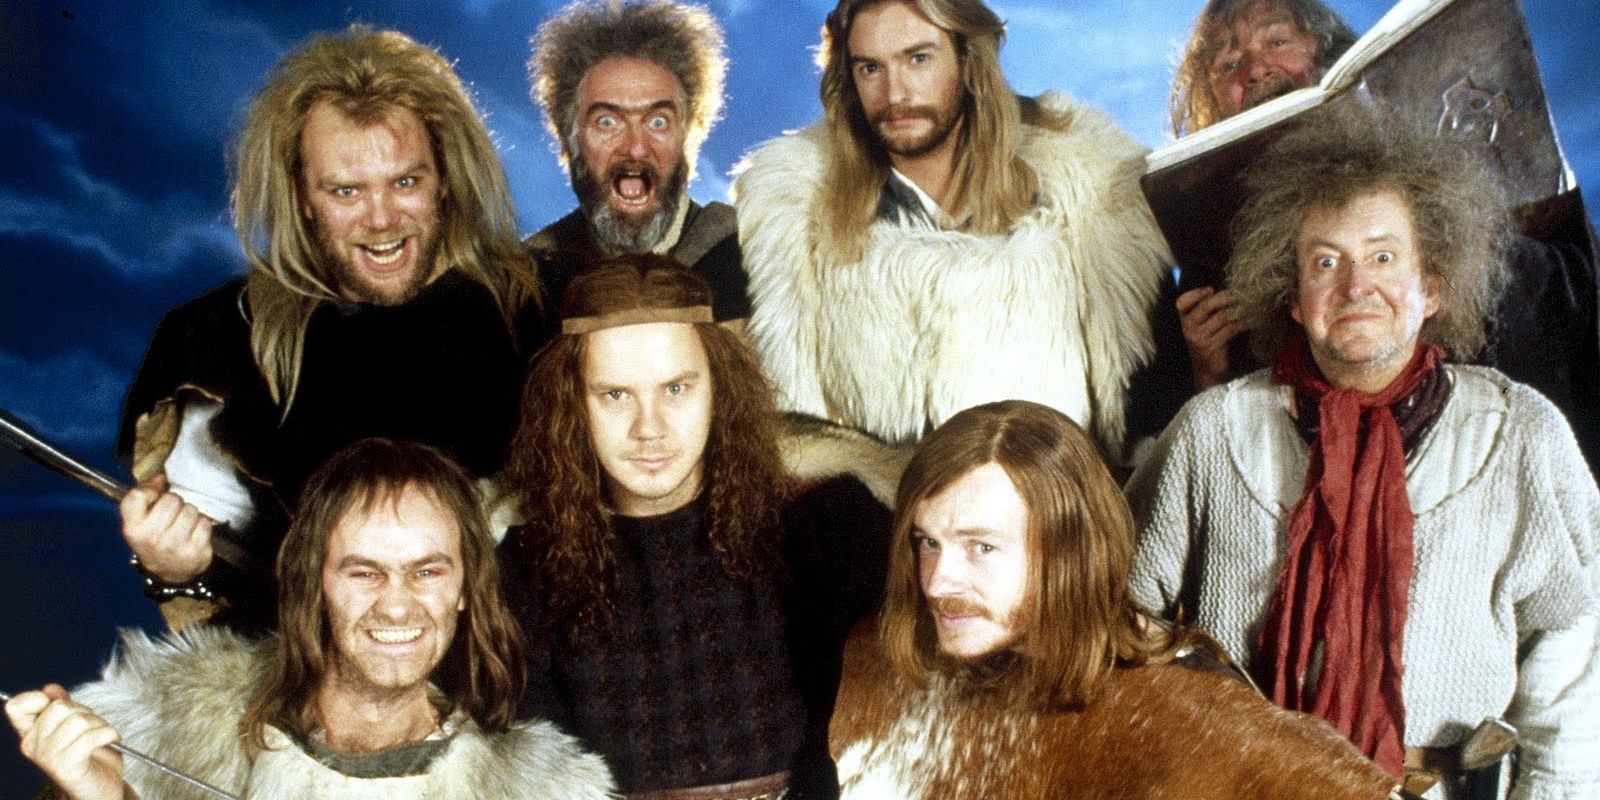 The cast of Erik the Viking pose for a promotional image.